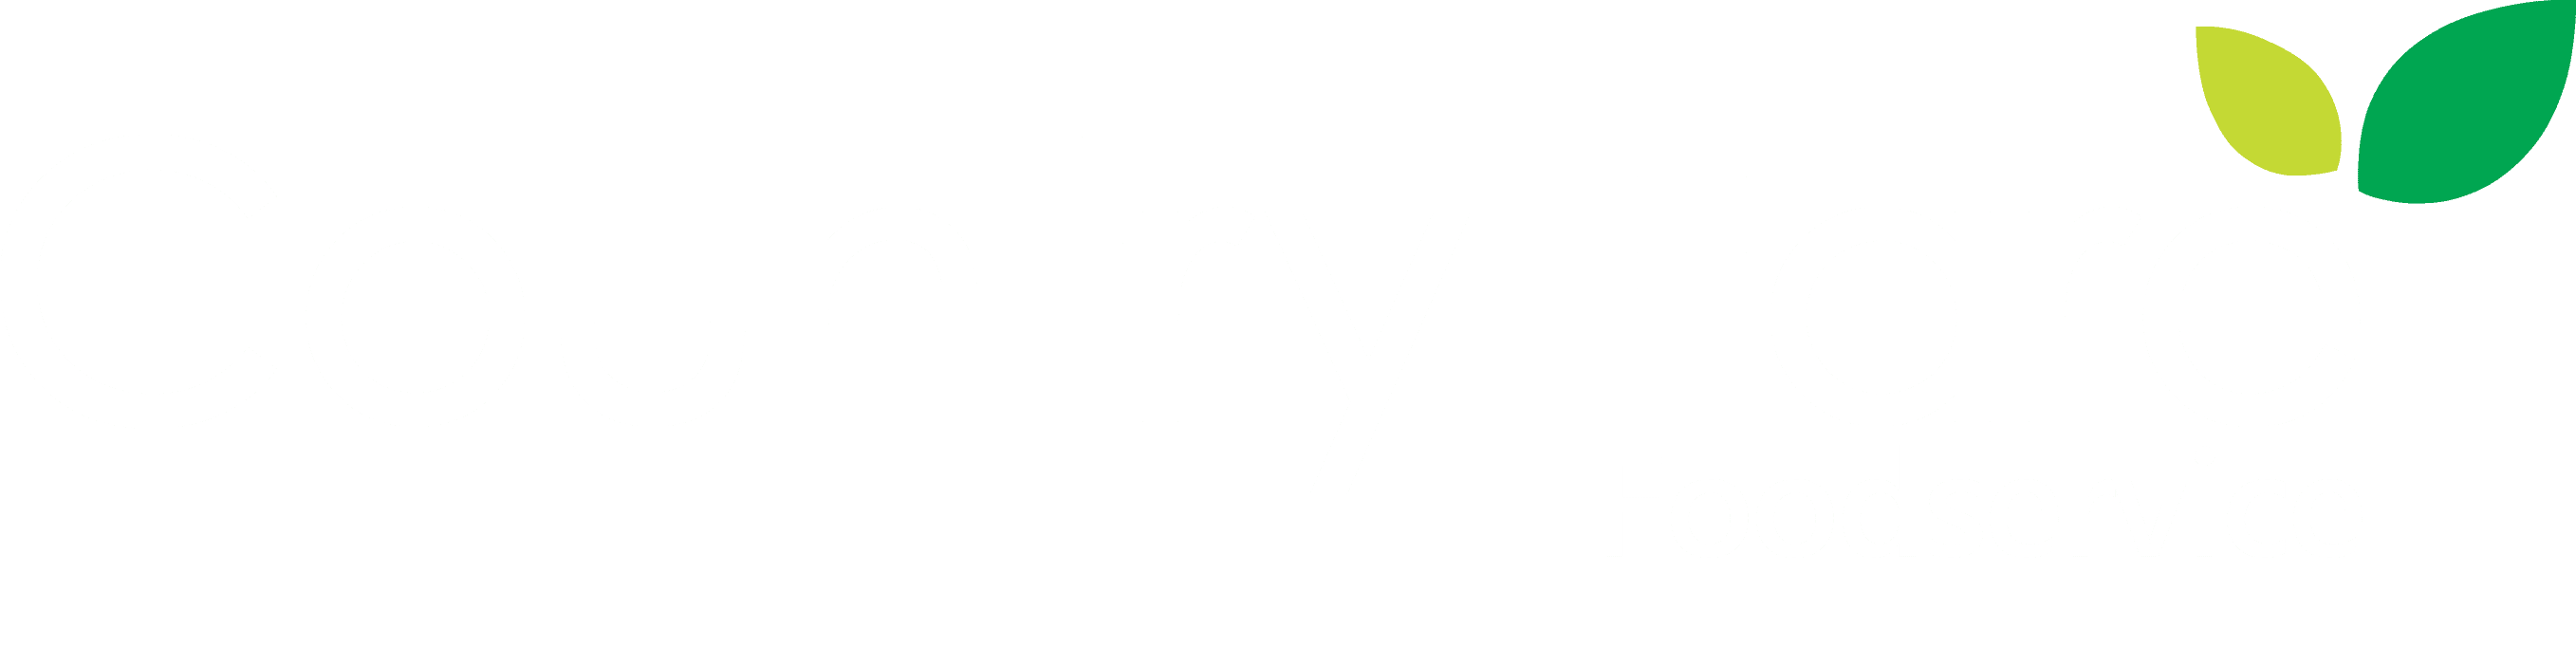 https://www.countryfare.co.uk/wp-content/uploads/2018/10/NEW.Foodservice.logo_.white_.colour.png